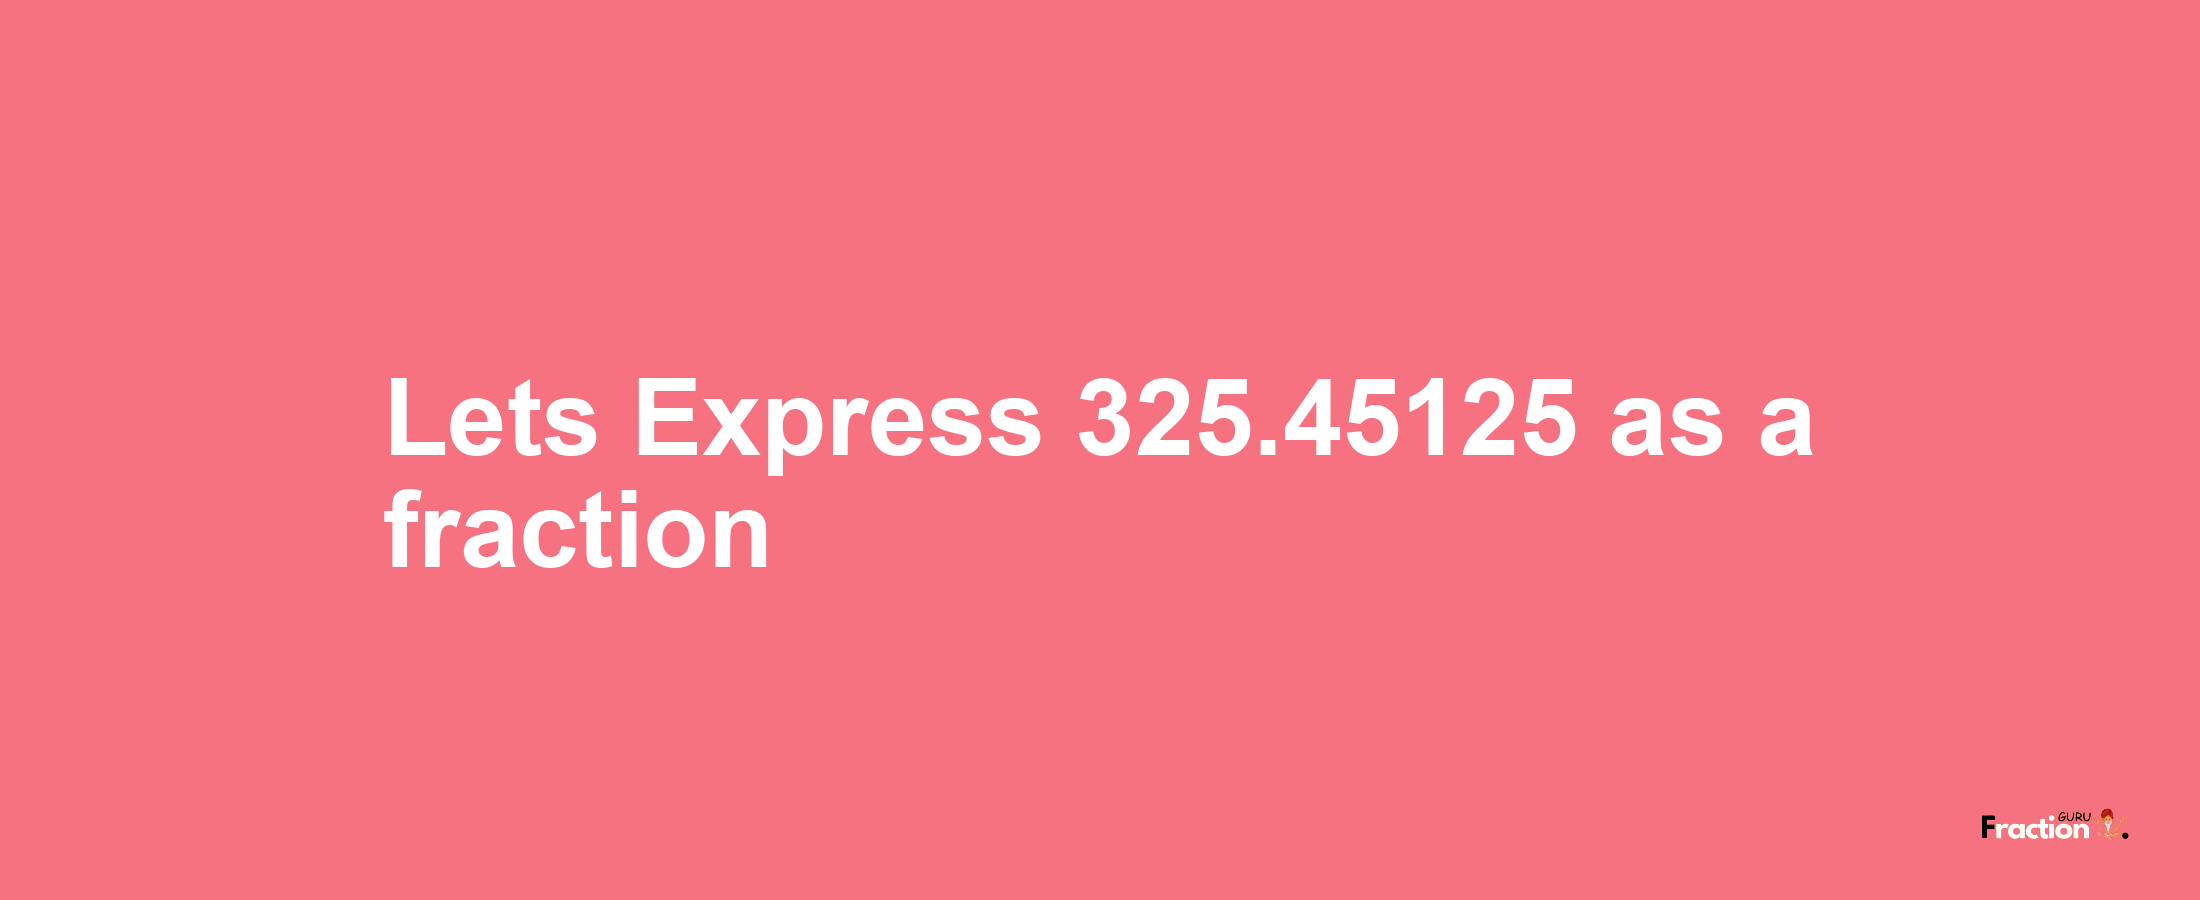 Lets Express 325.45125 as afraction